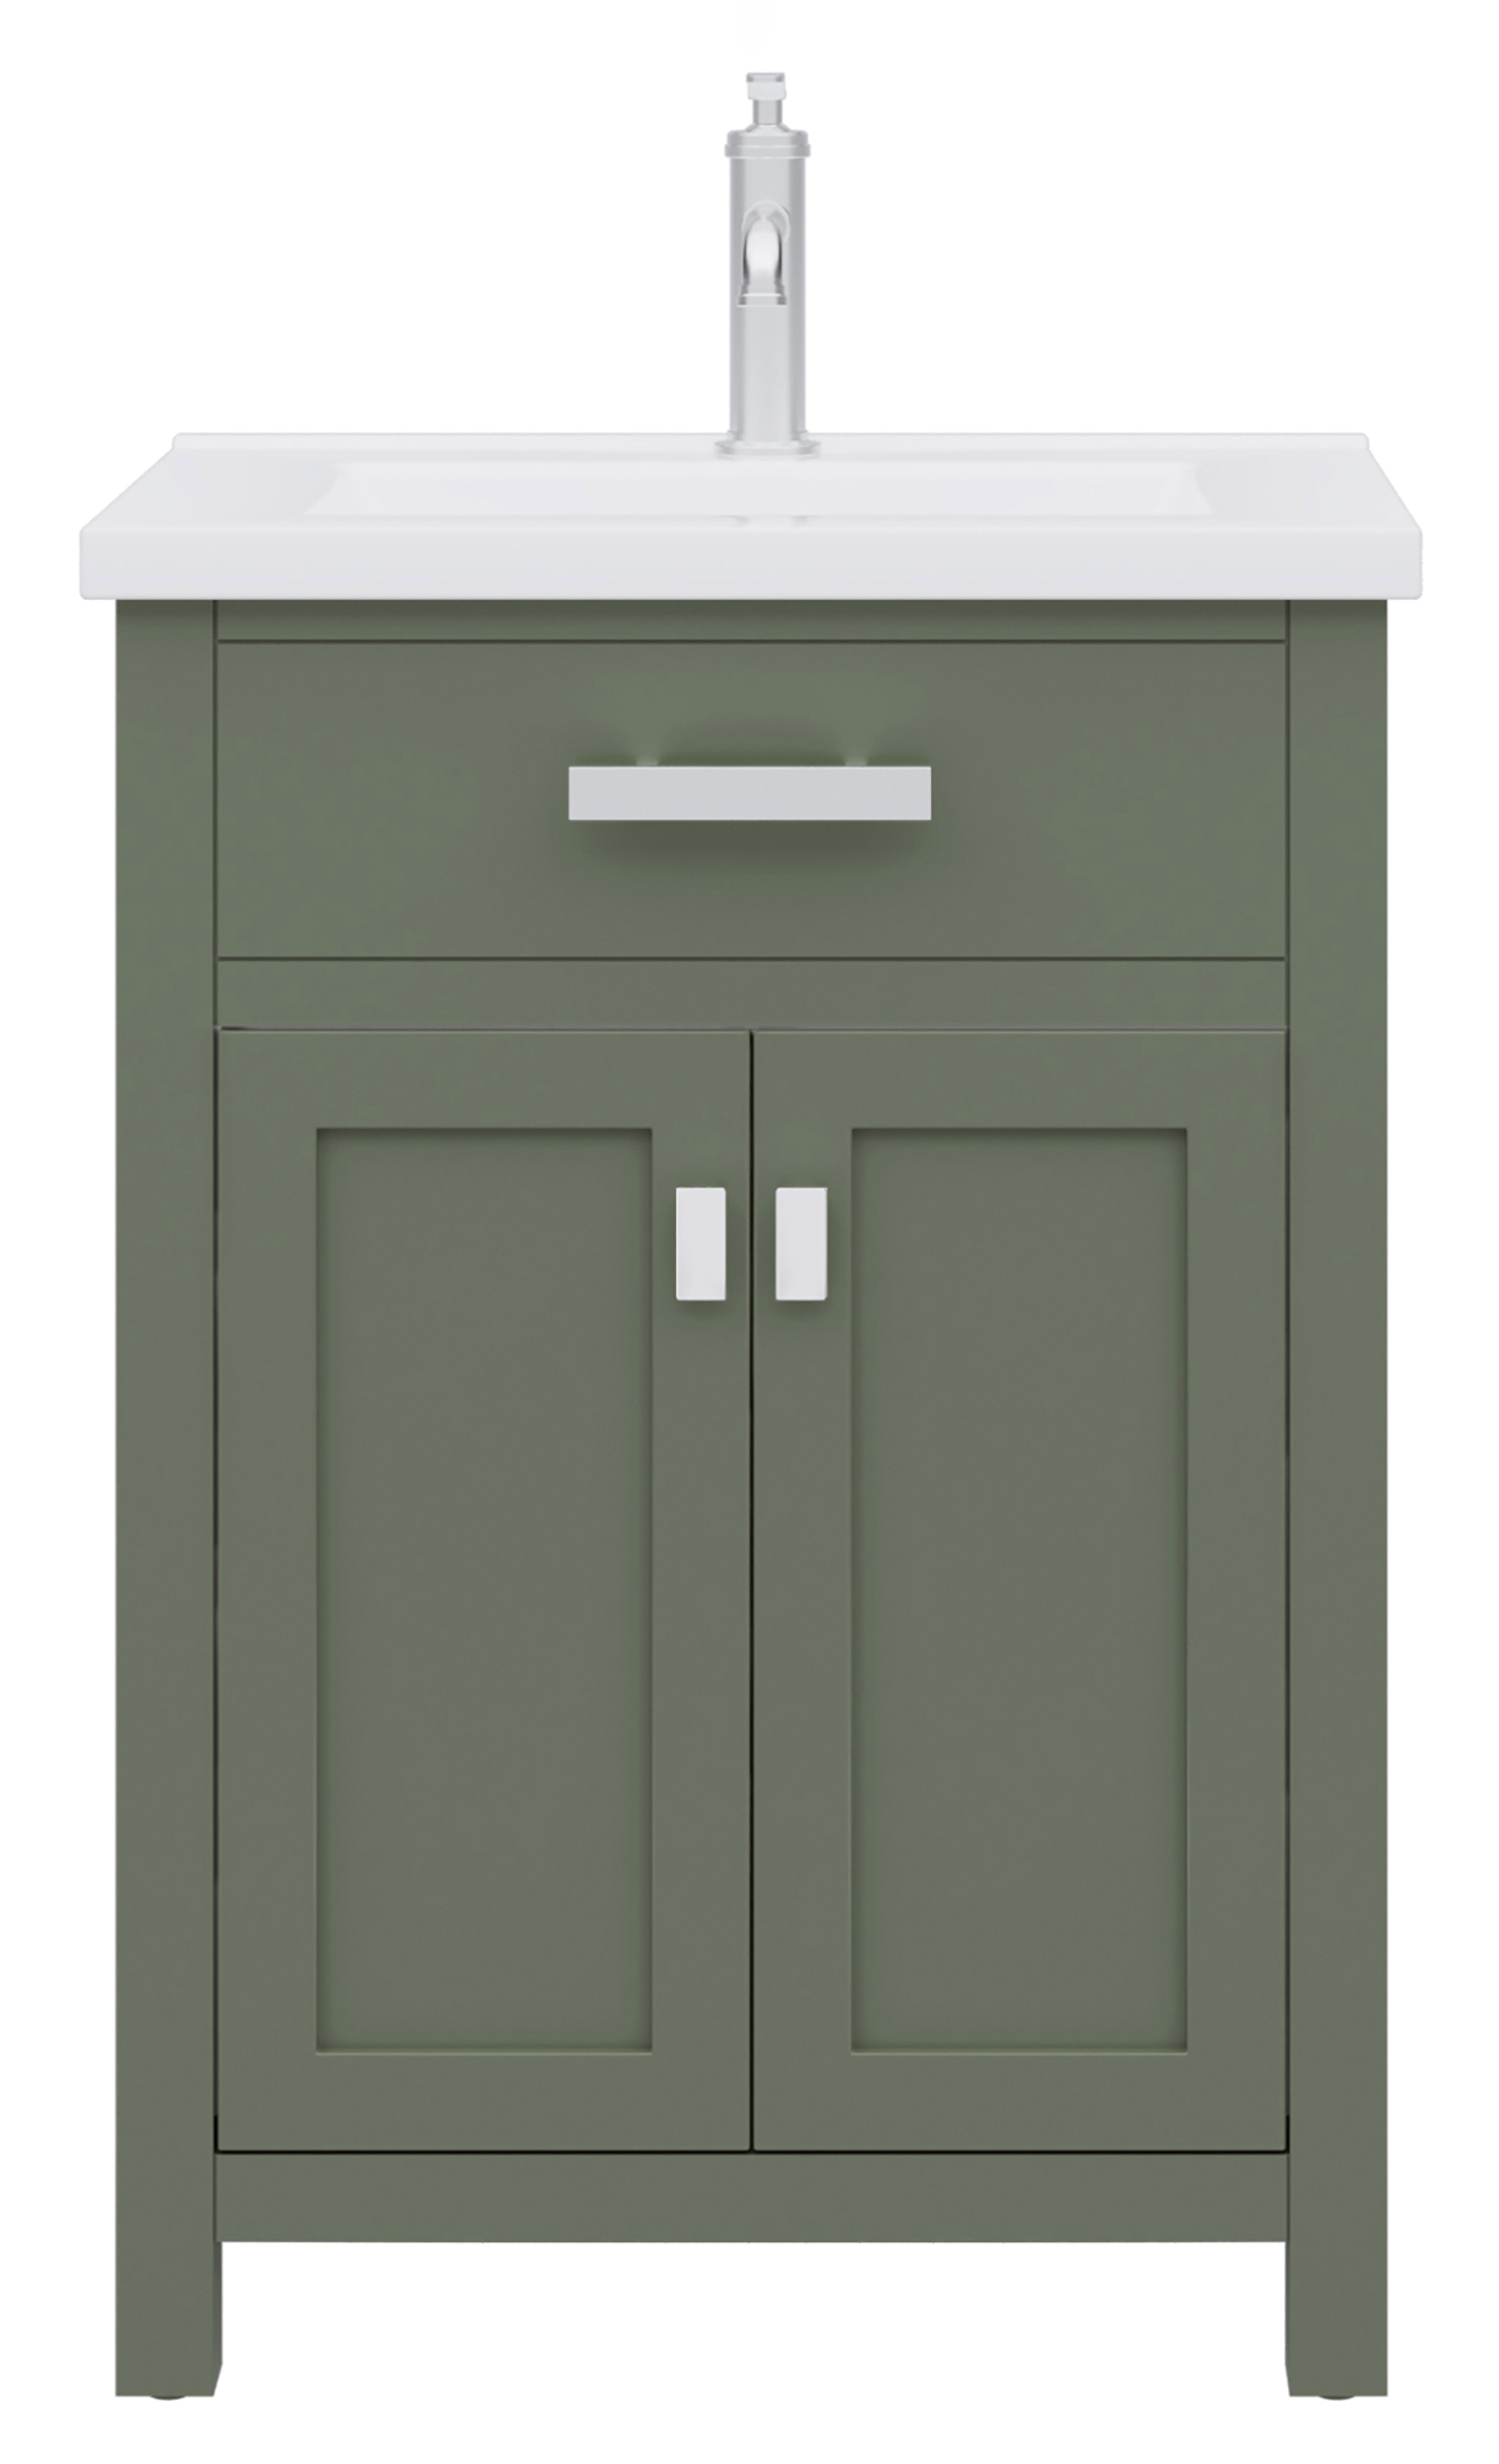 24" Integrated Ceramic Sink Top Vanity in Glacial Green with Faucet Option